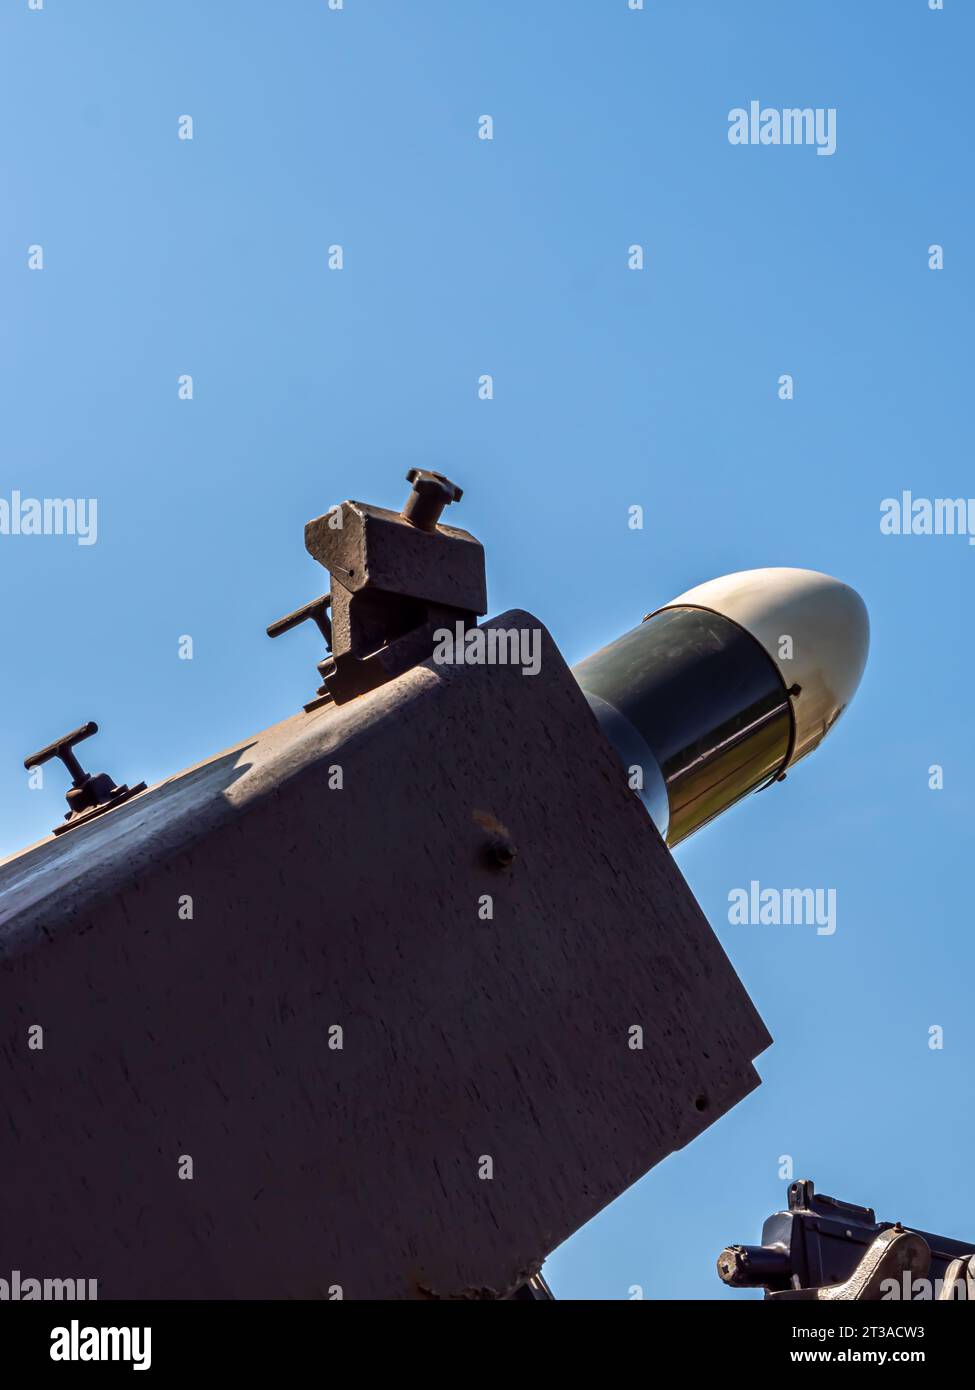 A missile launcher on a small tank, armoured vehicle Stock Photo